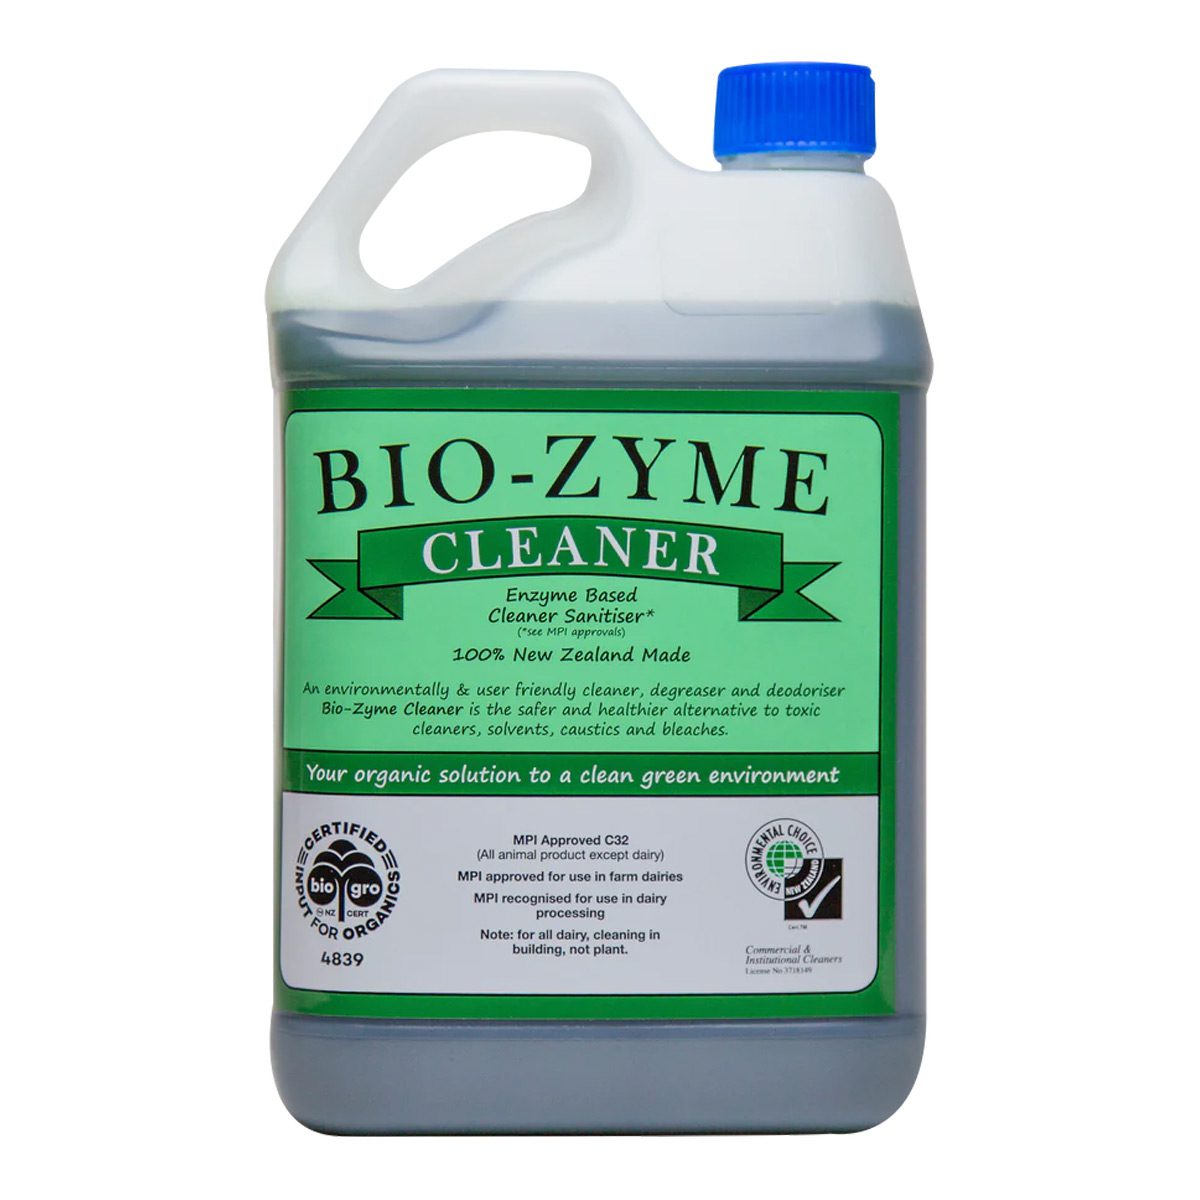 cleaning-products-environmental-bio-zyme-cleaner-green-5L-litre-safer-than-toxic-solvents-cleaners-bleaches-caustics-all-purpose-cleaner-sanitiser-deodoriser-5L-makes-166L-litres-vjs-distributors-BZCLE5L